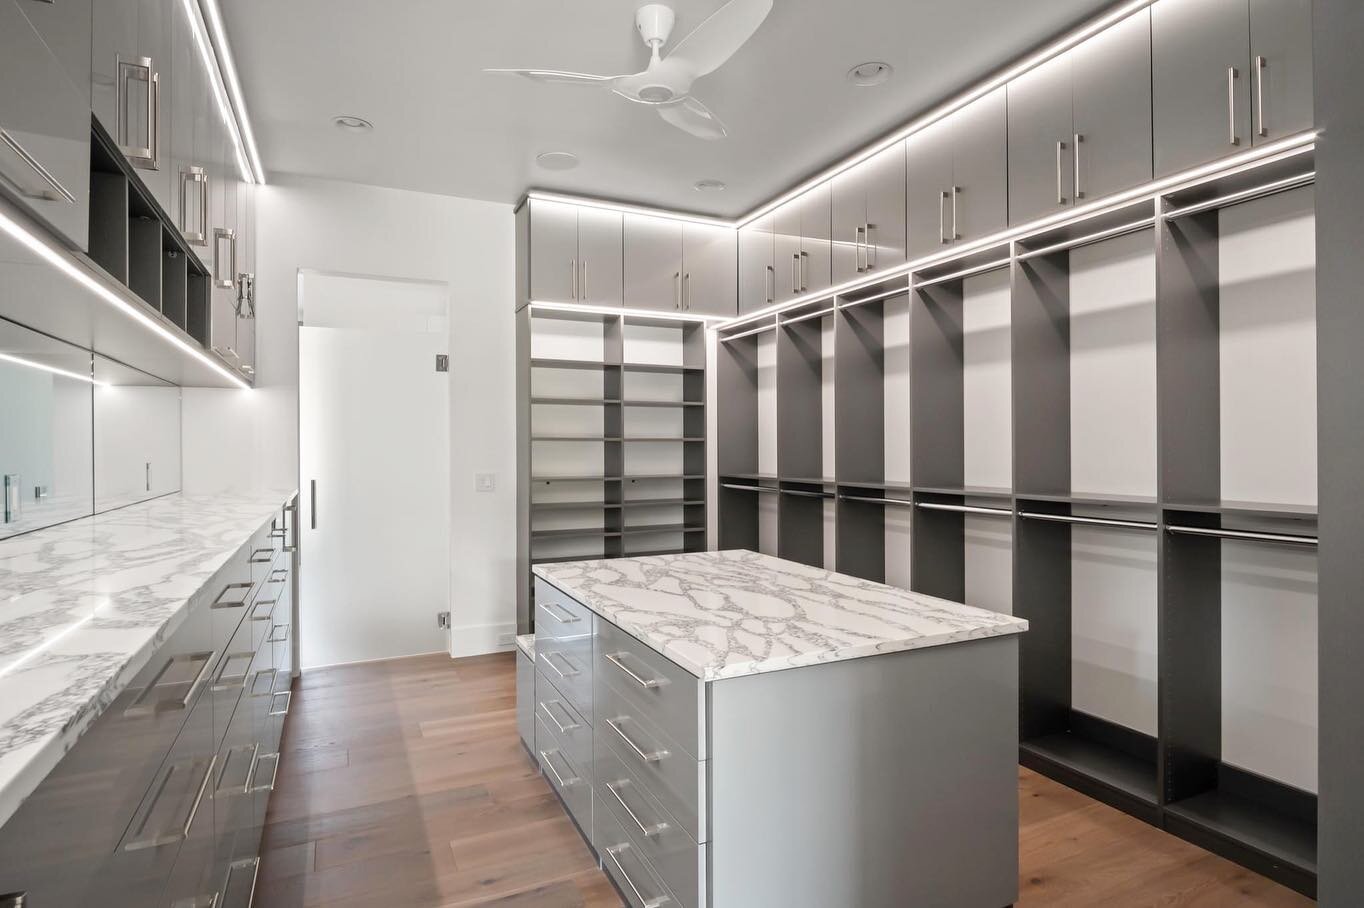 Now we know what our dream closet looks like and it definitely includes Vadara Quartz 🤩